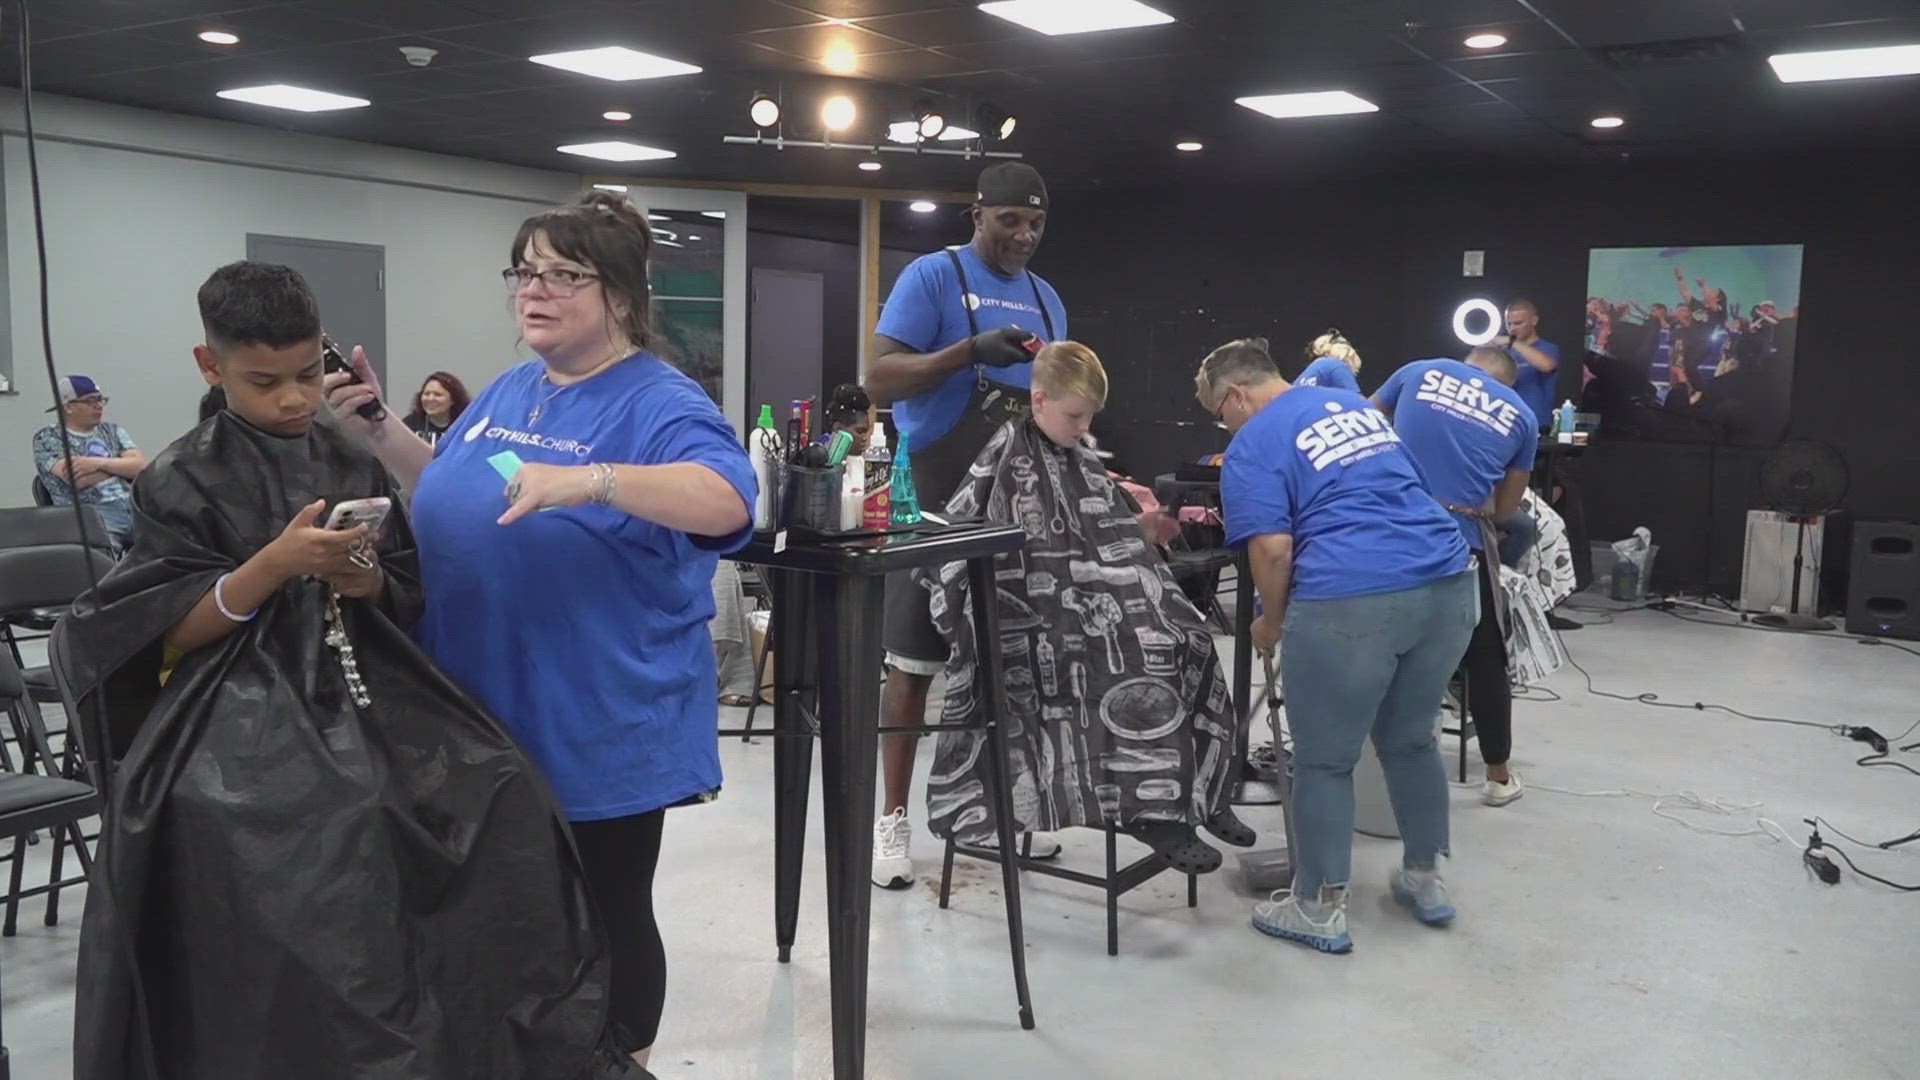 People of all ages and families served the community by setting up a food pantry, giving free haircuts to kids, changing people's oil, giving away gas and more.